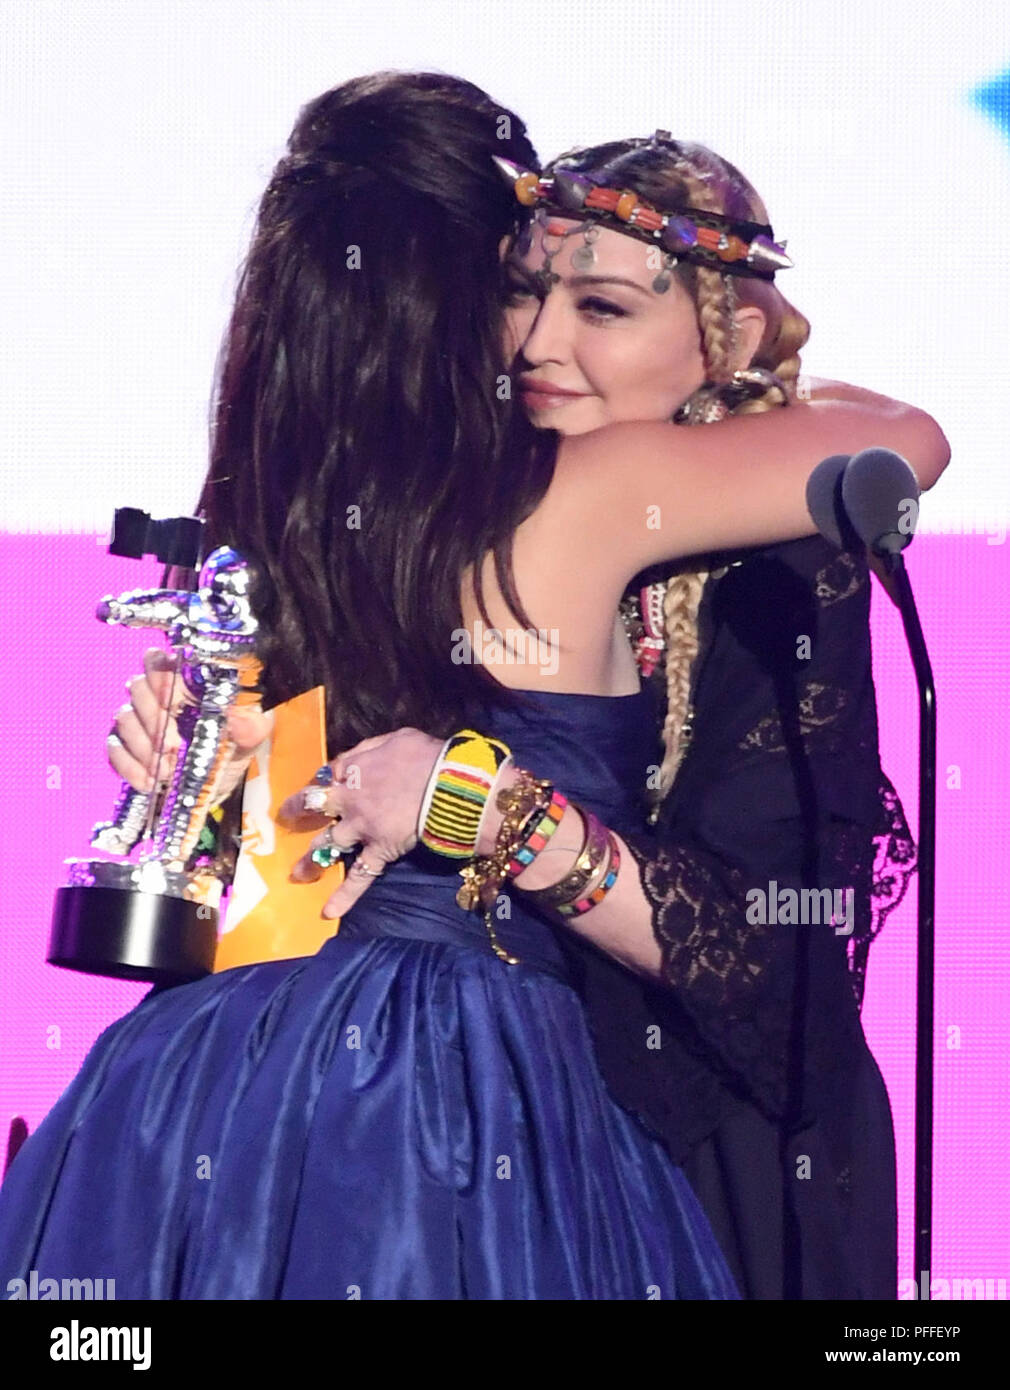 Camila Cabello (left) accepts the award for Video of the Year from Madonna on stage at the 2018 MTV Video Music Awards held at Radio City Music Hall in Los Angeles, USA. Picture date: Monday August 20, 2018. See PA Story SHOWBIZ VMAs. Photo credit should read: PA/PA Wire on stage at the 2018 MTV Video Music Awards held at The Forum in Los Angeles, USA. Picture date: Monday August 20, 2018. See PA Story SHOWBIZ VMAs. Photo credit should read: PA/PA Wire Stock Photo